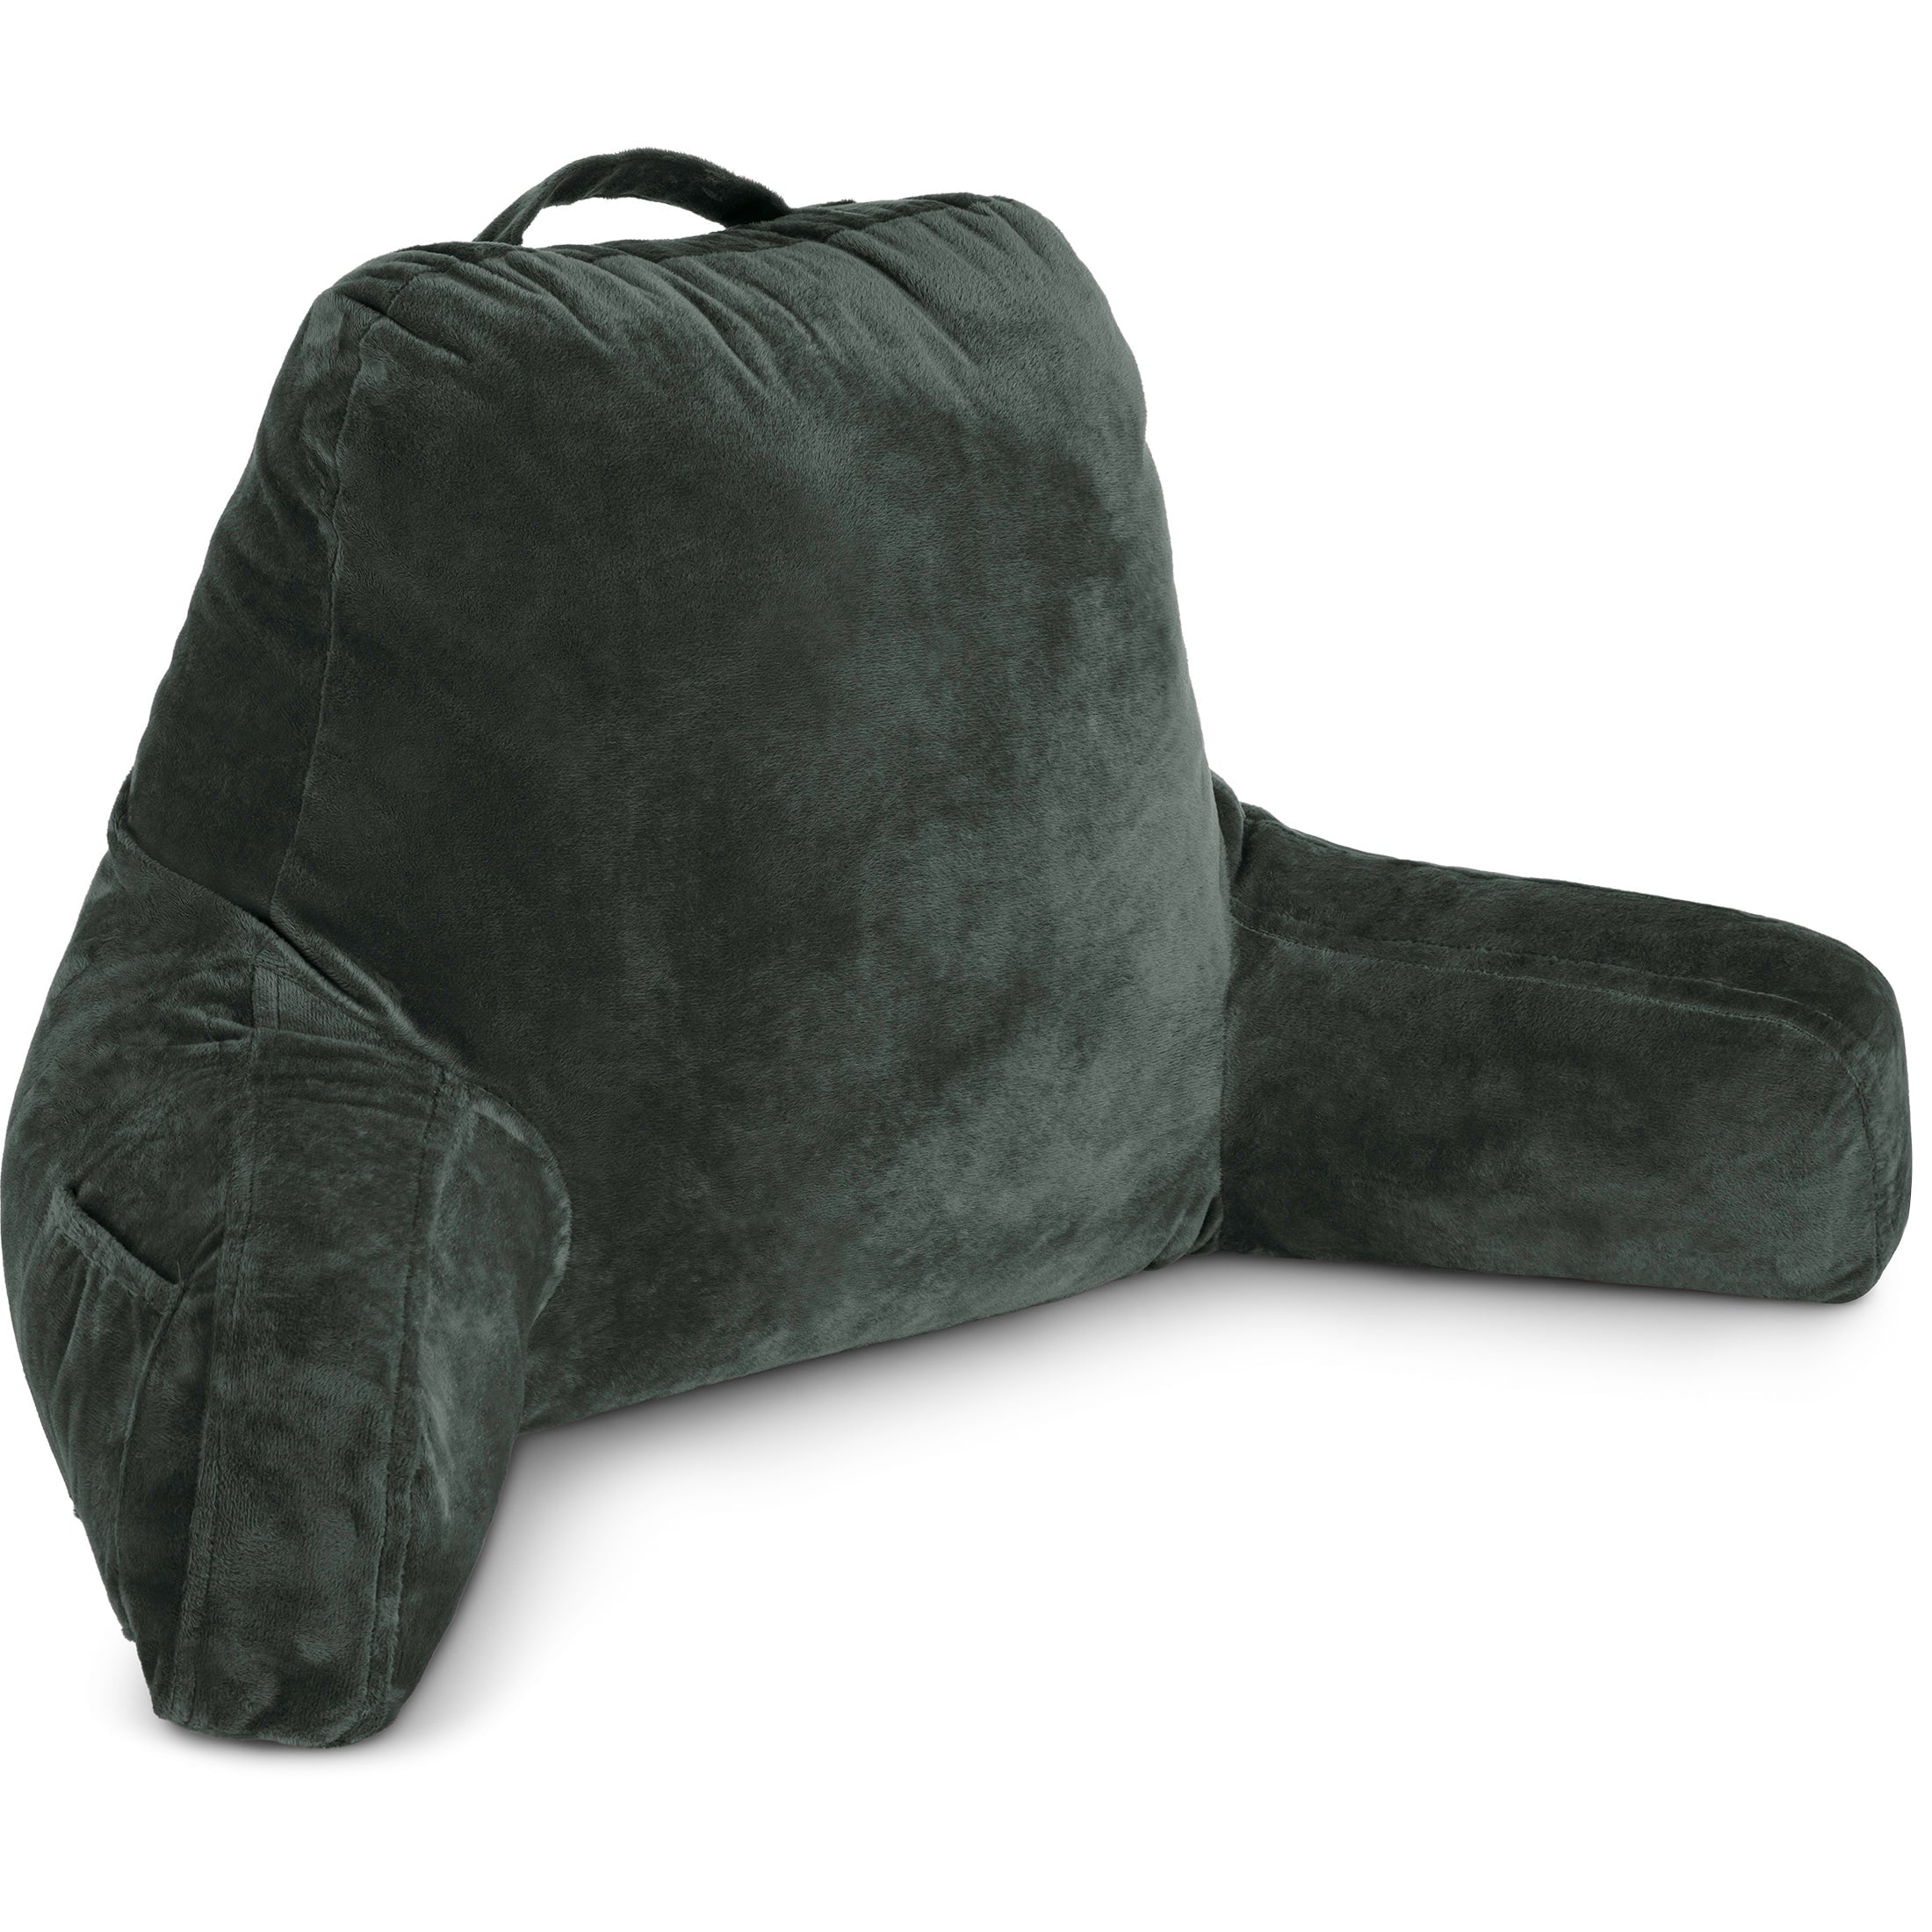 Husband Pillow Dark Green, Original Reading Pillow in Bed Rest Chair,  Shredded Memory Foam Large Lounge Cushion Adult Backrest with Arms, Comfy  Back